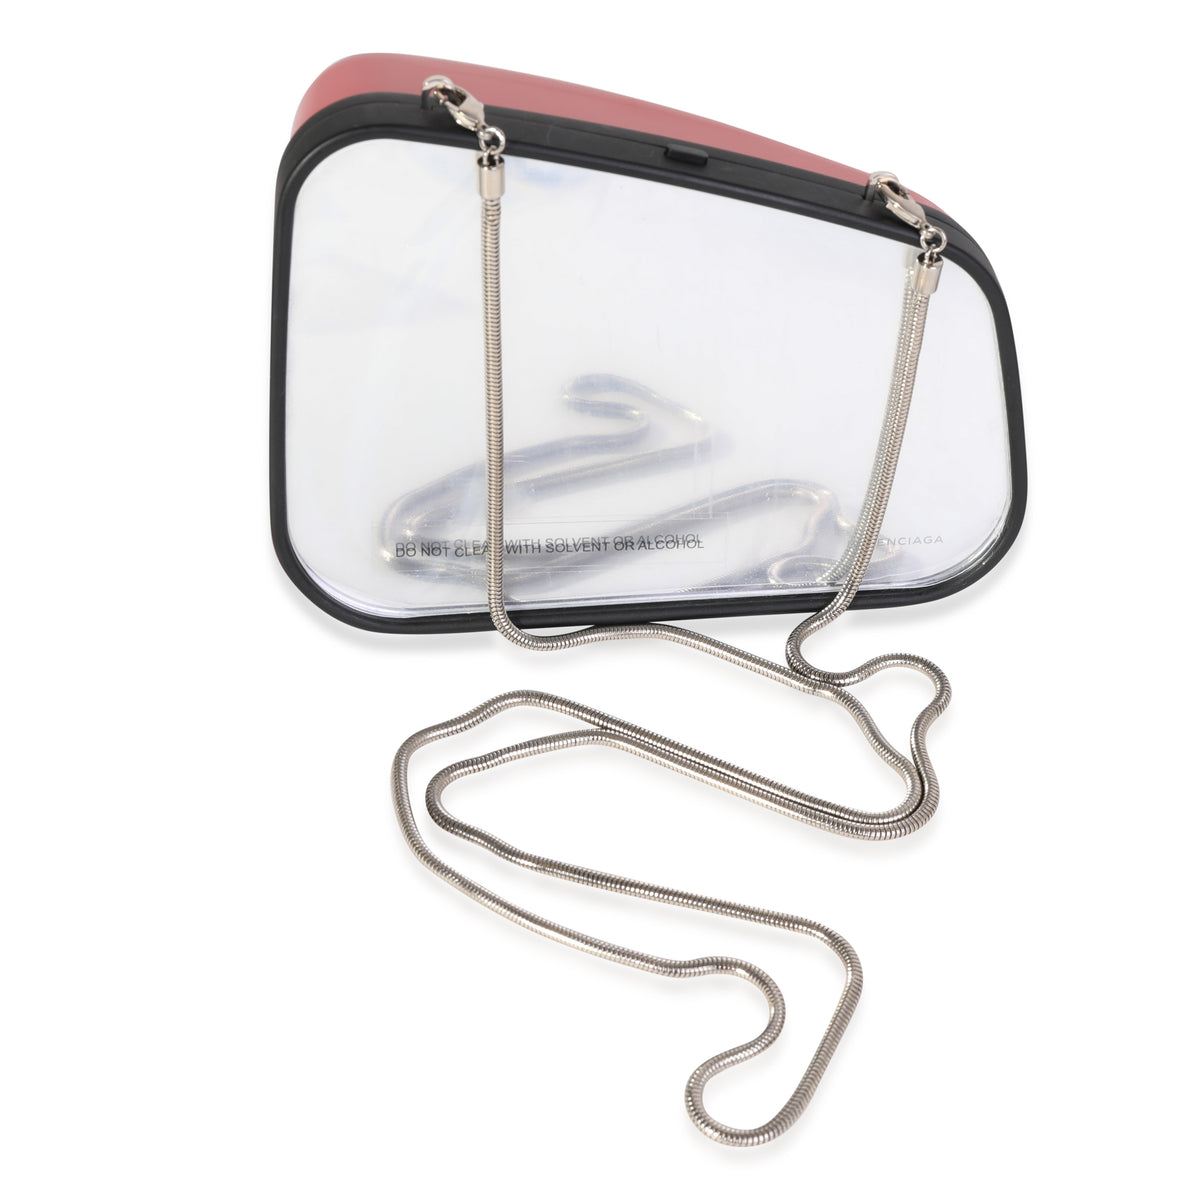 Balenciaga Red Acrylic Side-View Mirror Clutch with Chain